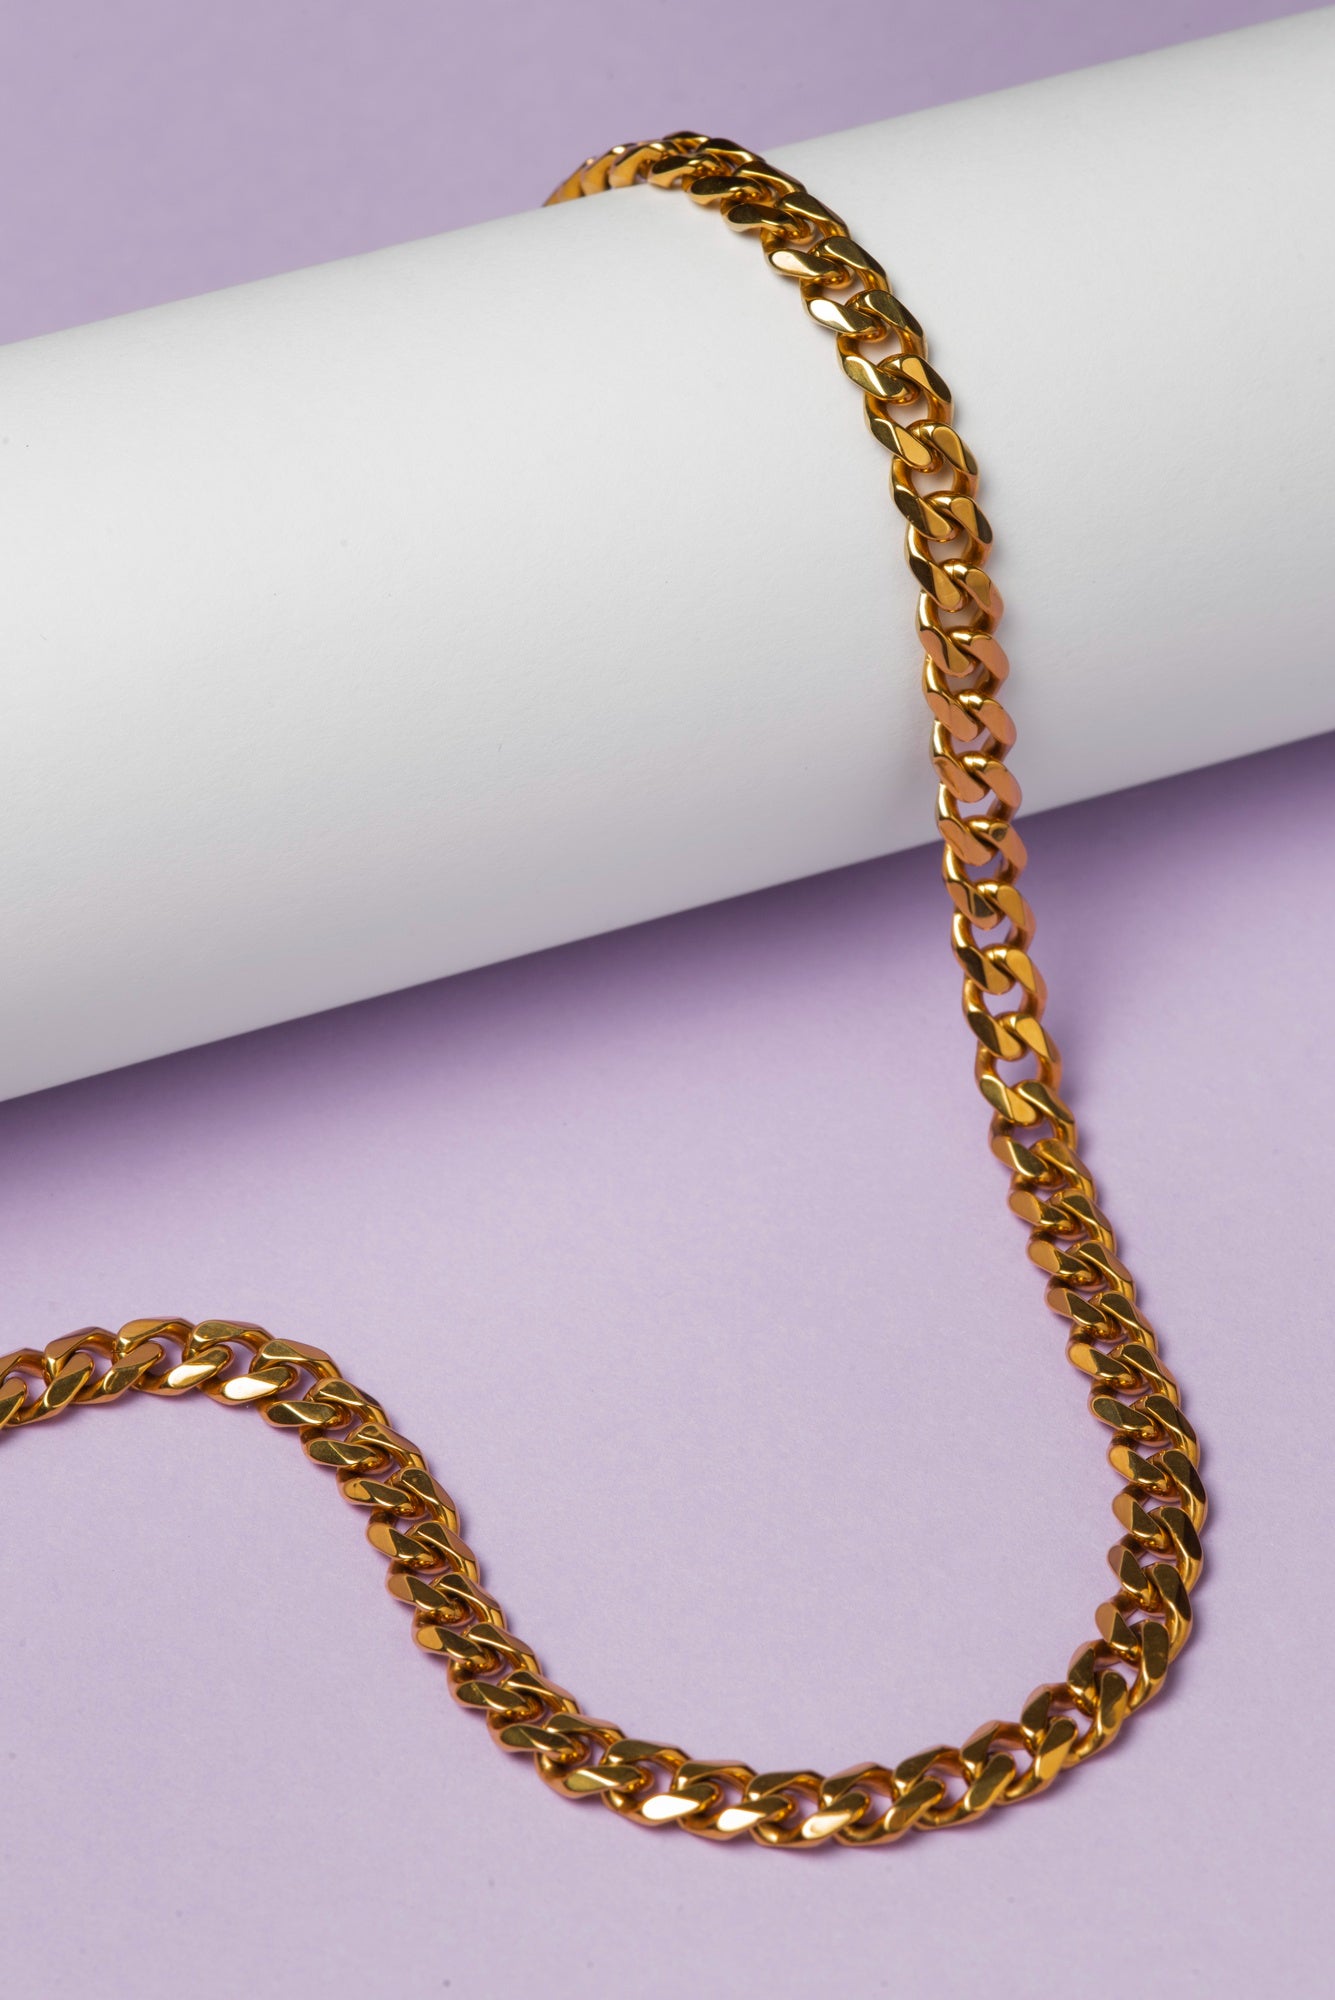 10mm Gold Cuban Link Chains Collection in Miami, FL